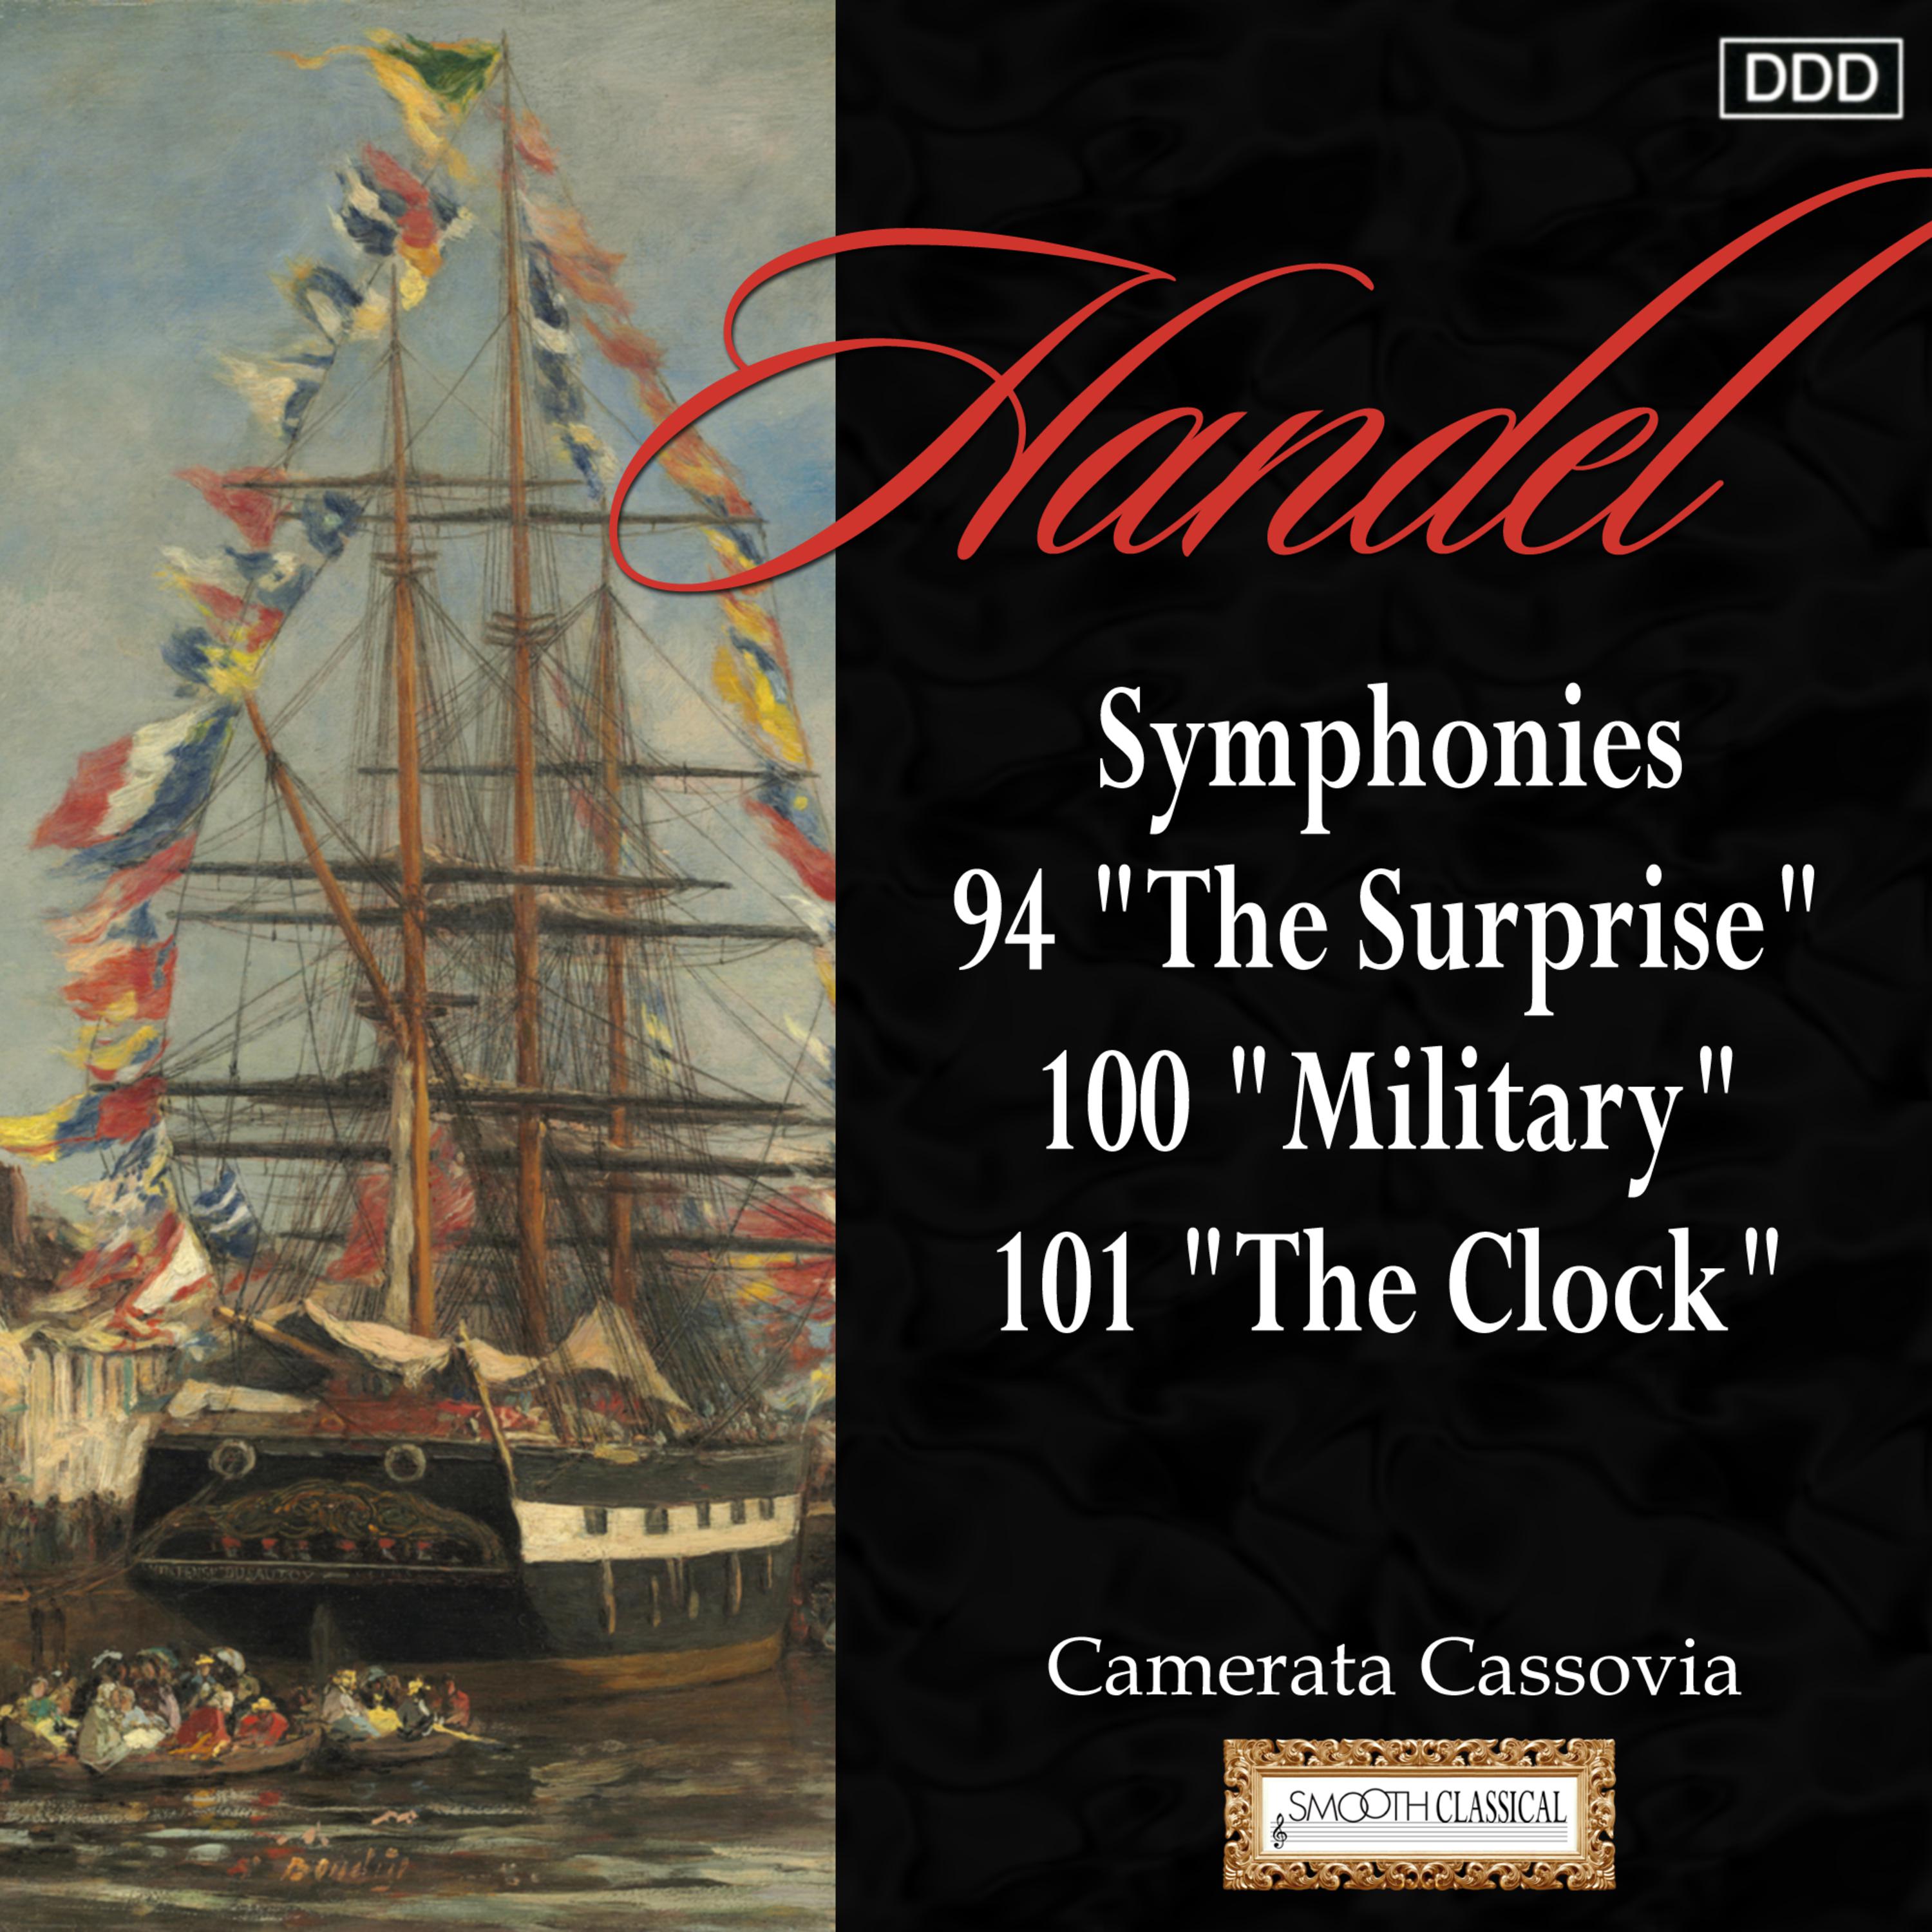 Haydn: Symphonies Nos. 94 "The Surprise", 100 "Military" and 101 "The Clock"